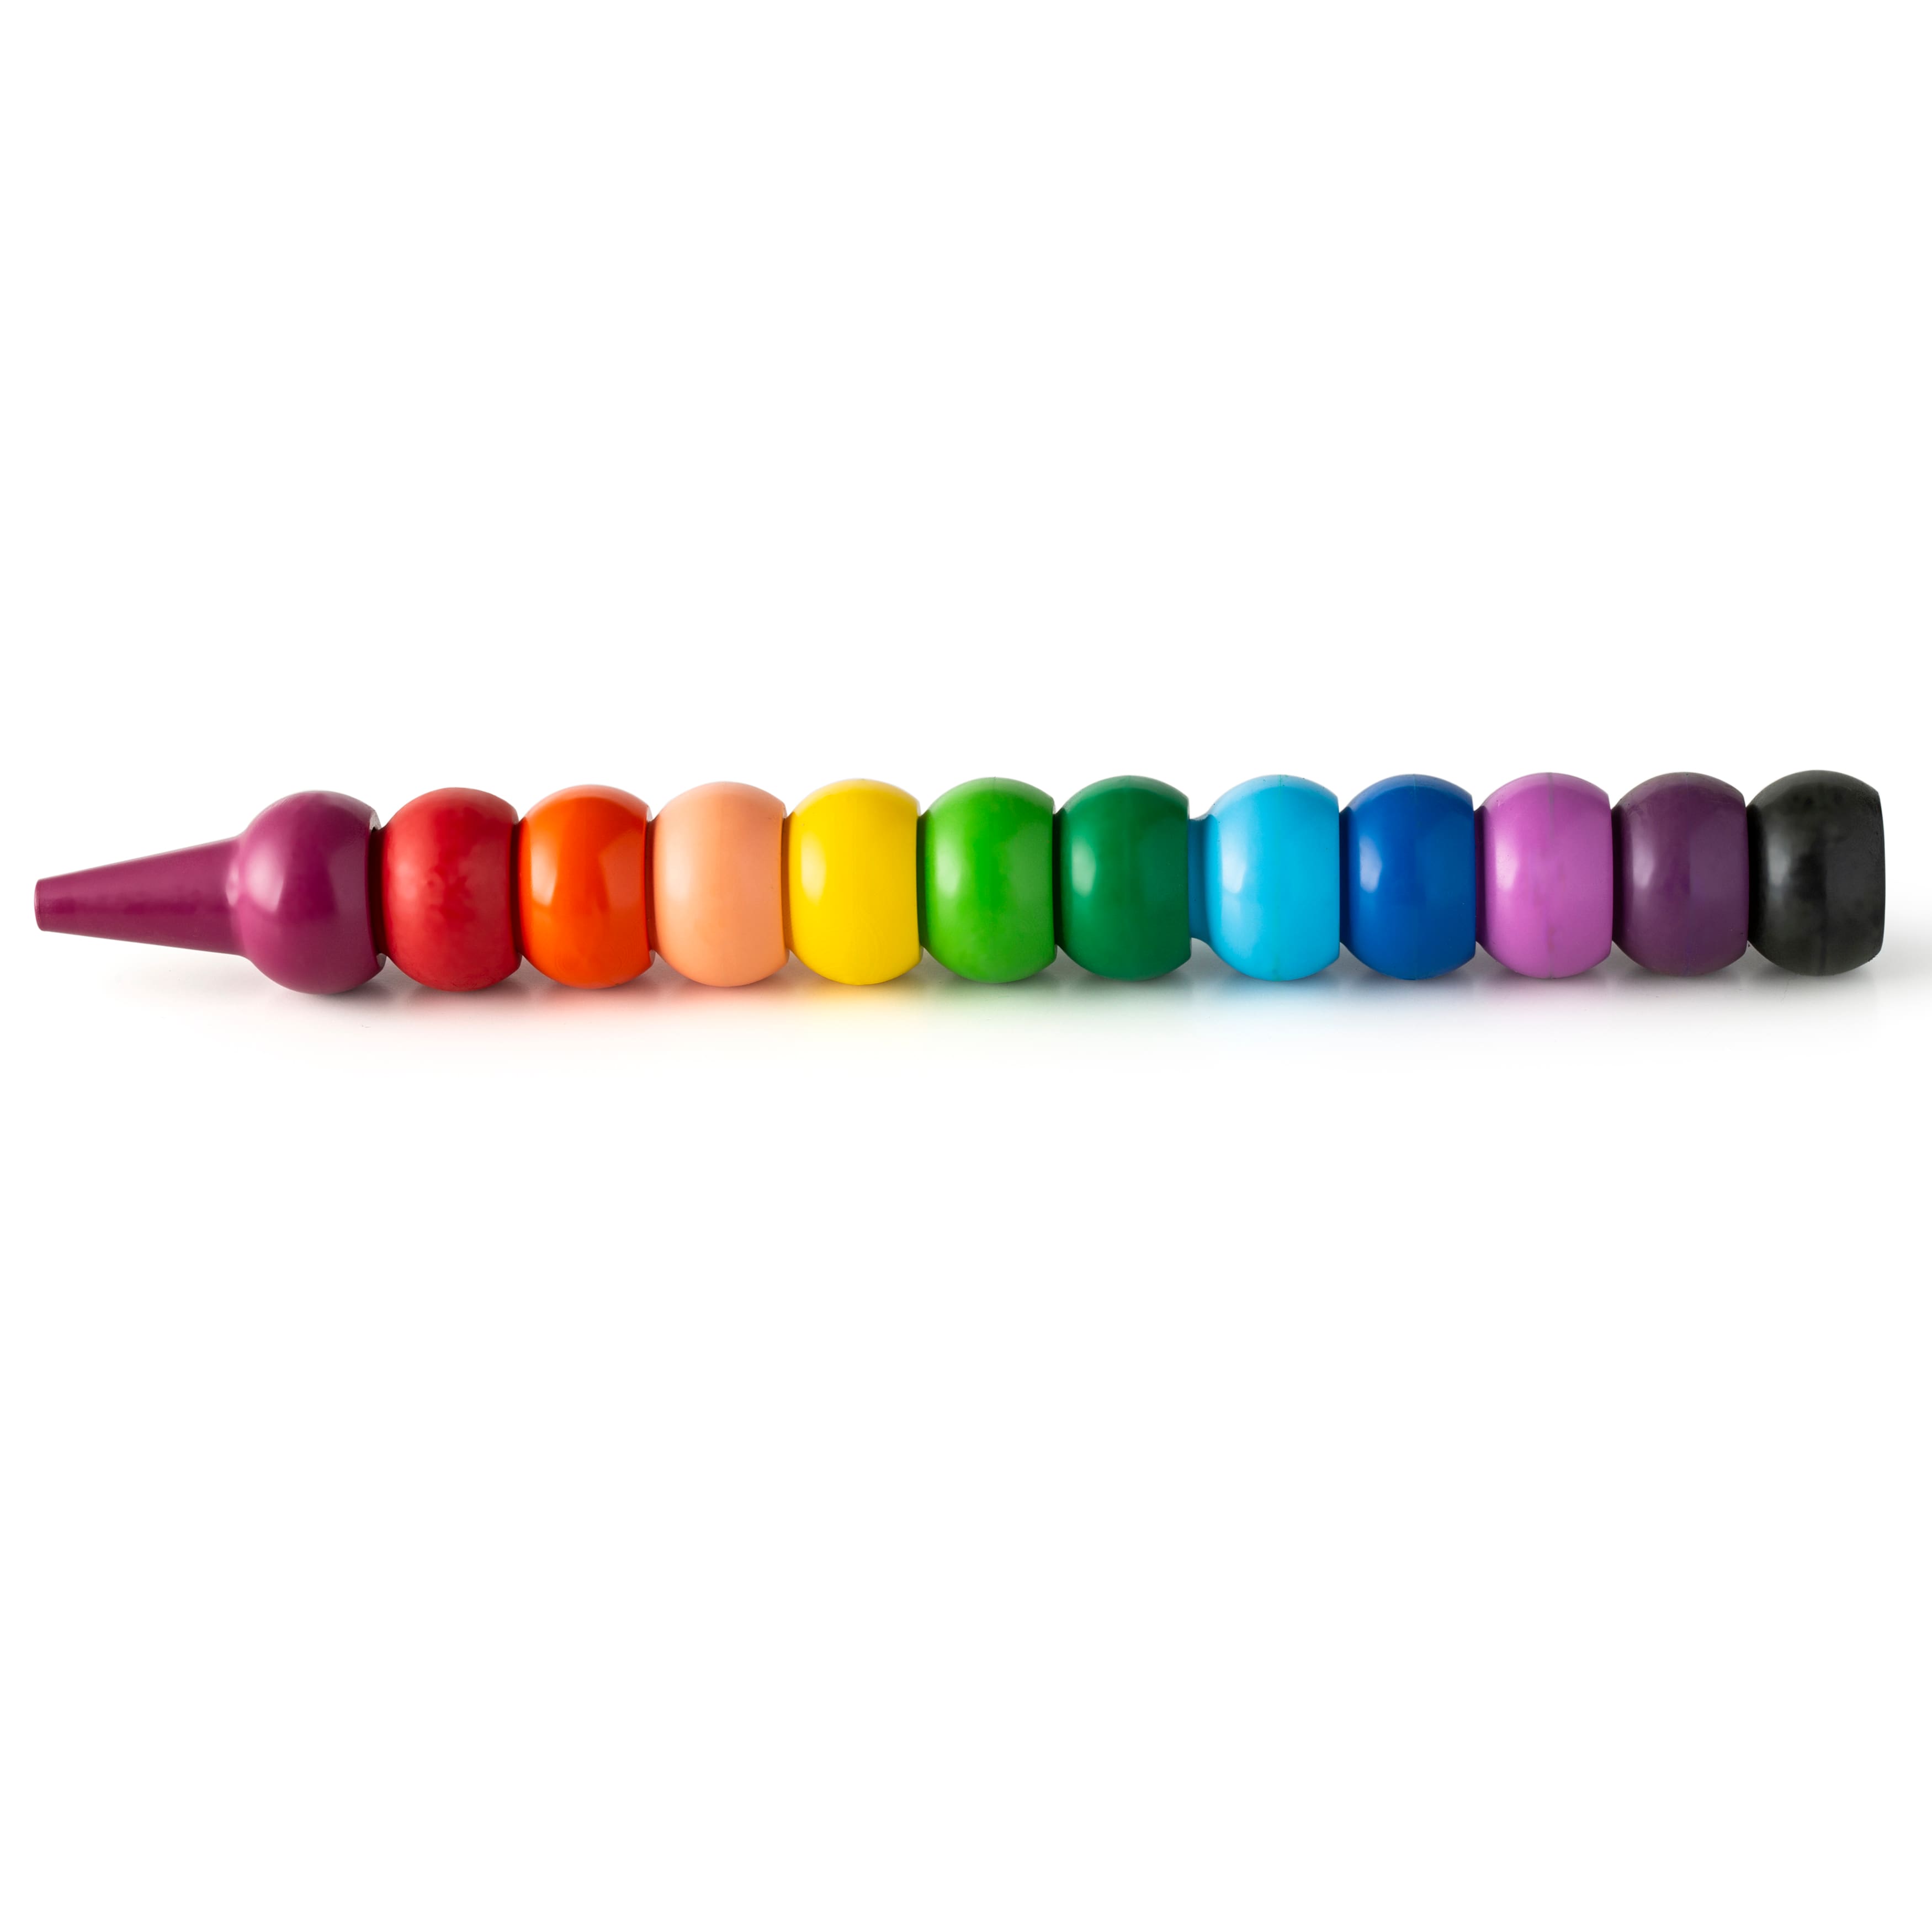 Find the Stacking Crayons By Creatology™ at Michaels